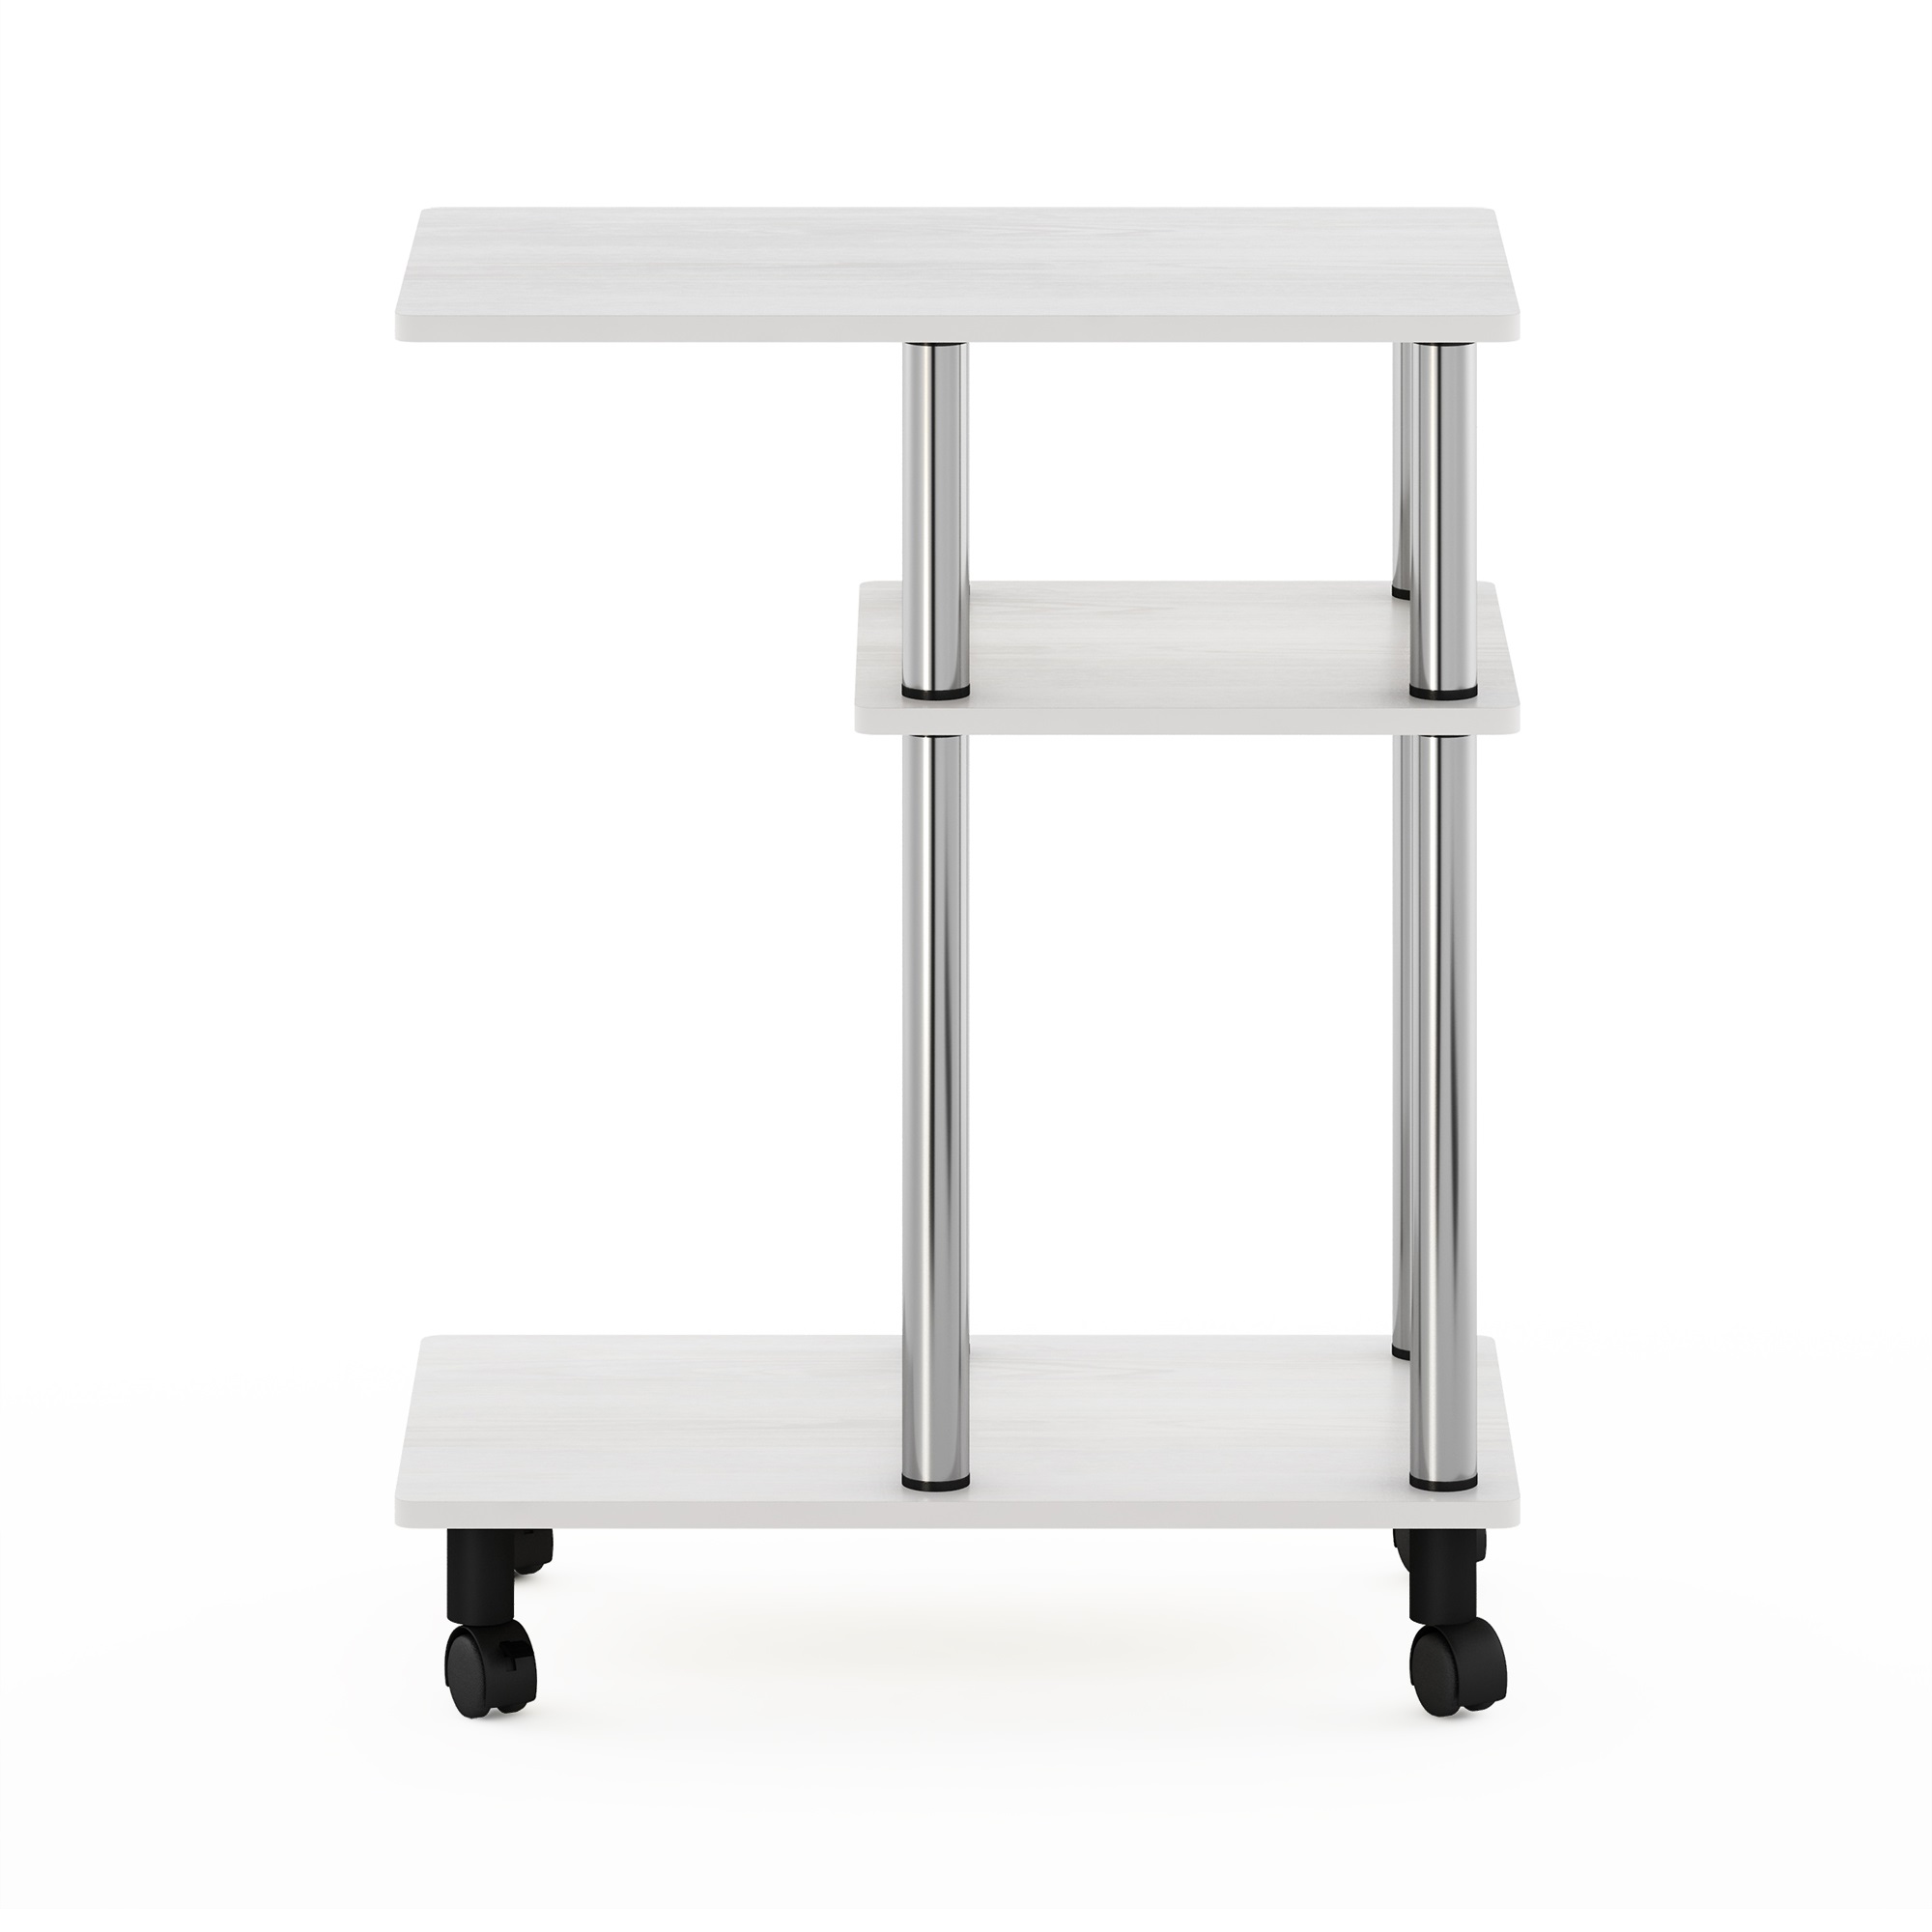 Furinno Turn-N-Tube U Shape Sofa Side Table with Casters, White Oak, Stainless Steel Tubes